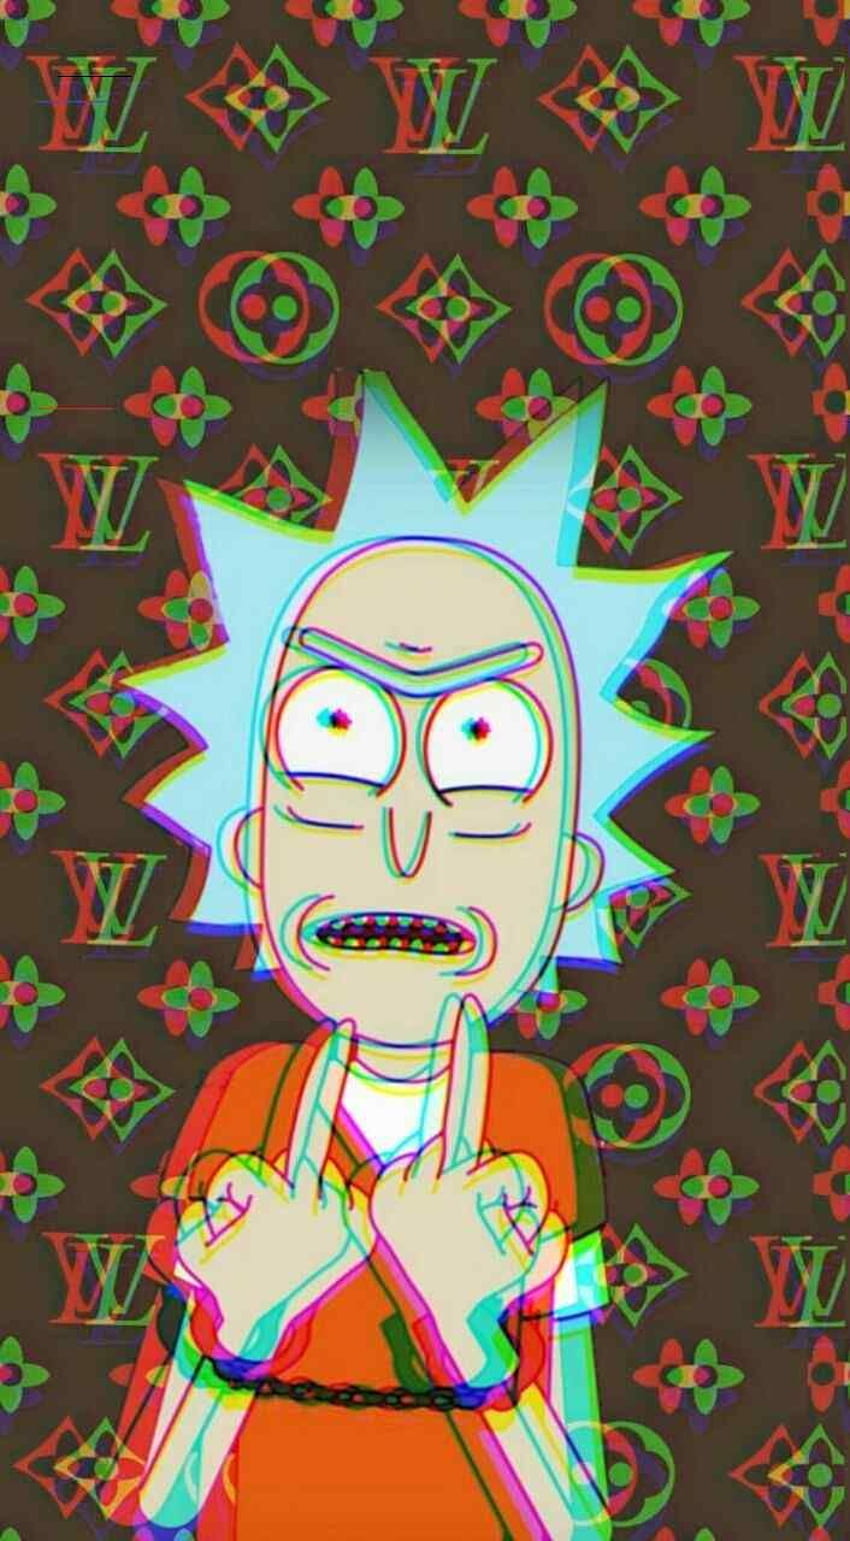 Rick and Morty in 2020. iPhone rick and morty, Trippy , Rick and morty poster, Rick and Morty Aesthetic HD phone wallpaper